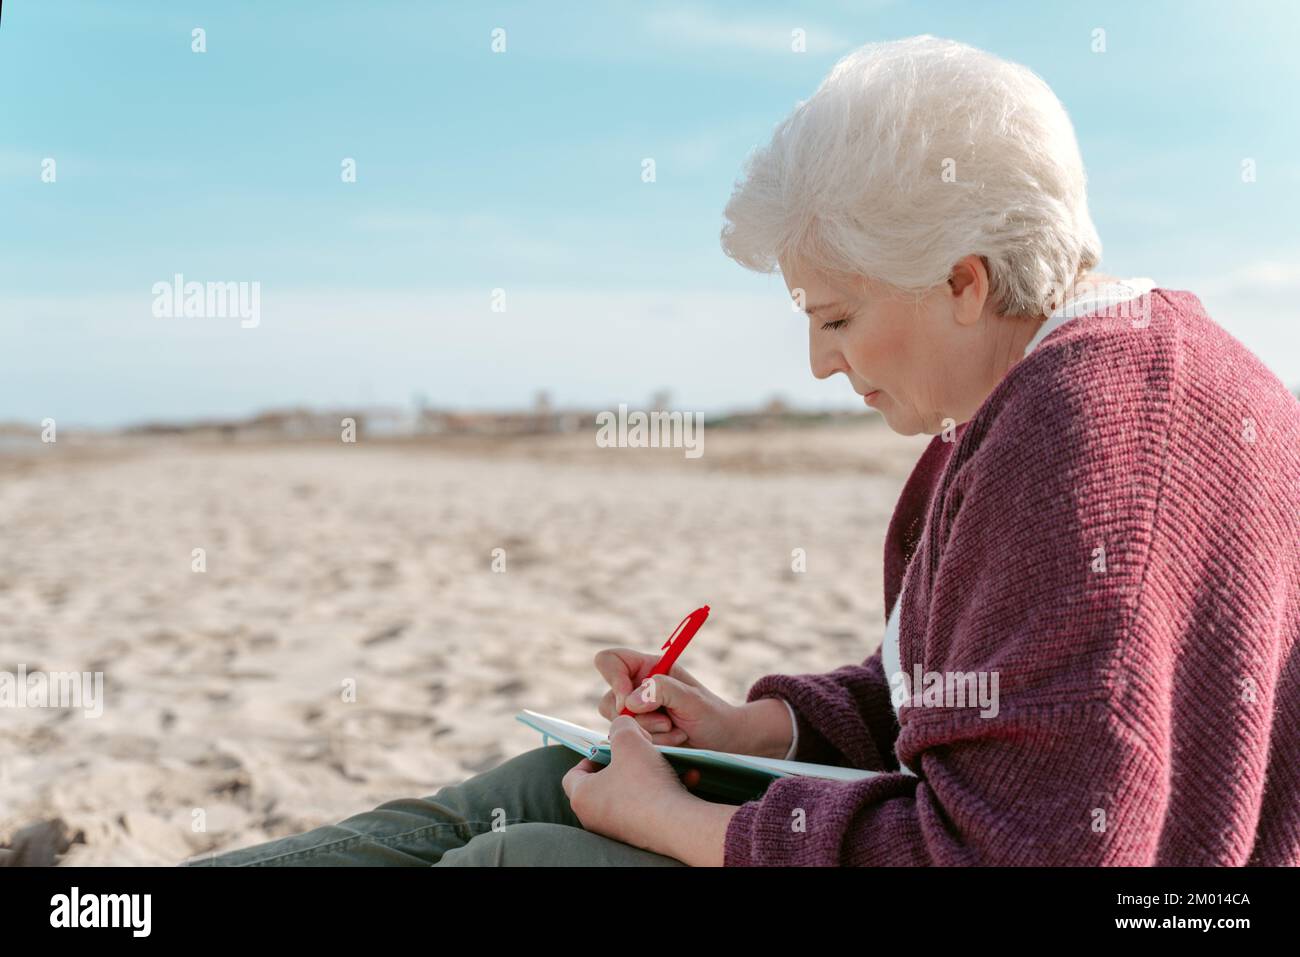 Side view of a focused female diarist sitting on the sand and writing in her diary. Stock Photo